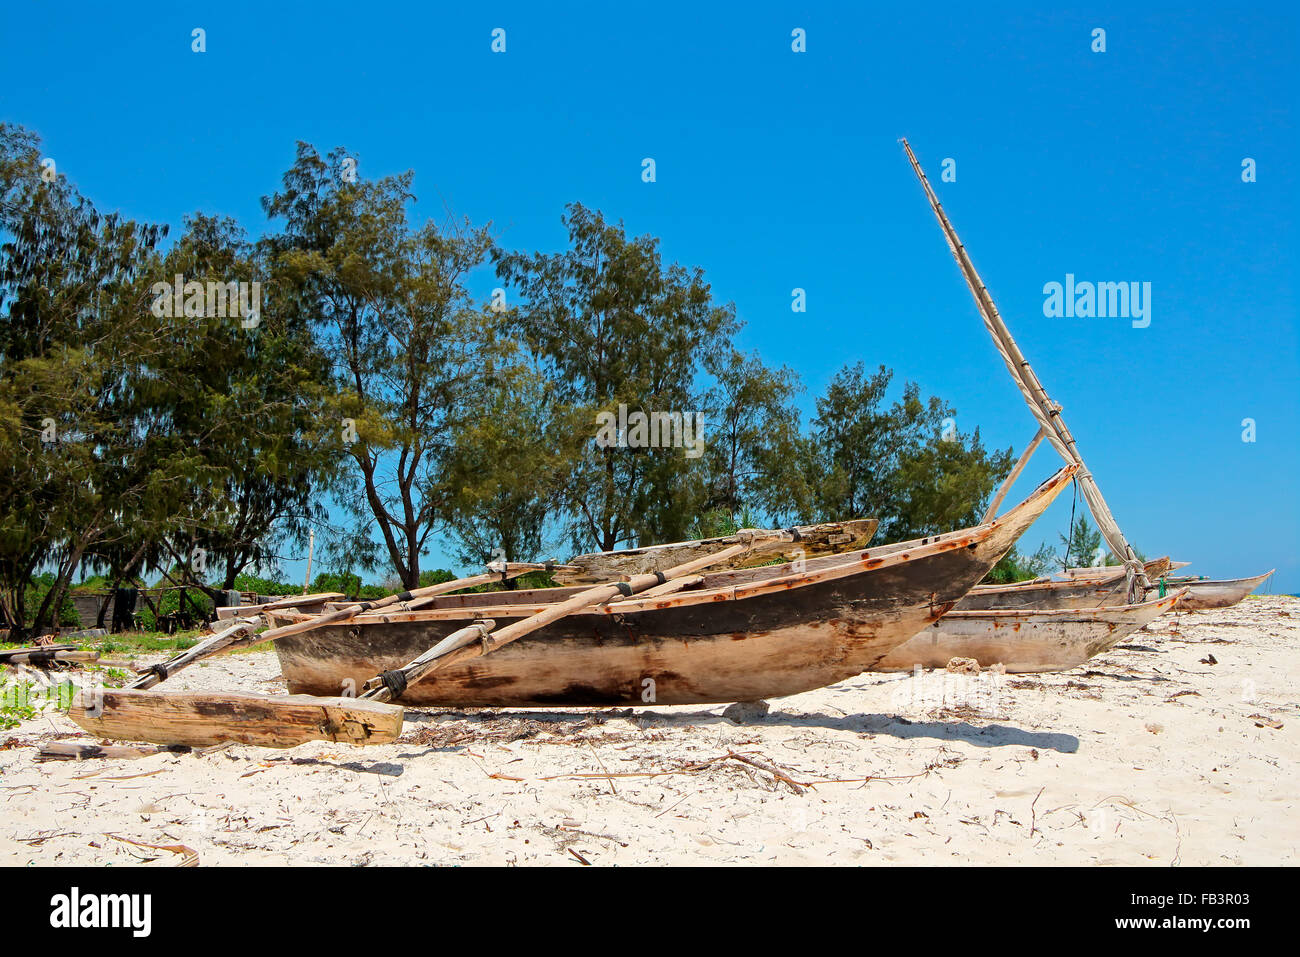 Wooden sailboats  (dhows) and trees on a tropical beach of Zanzibar island Stock Photo